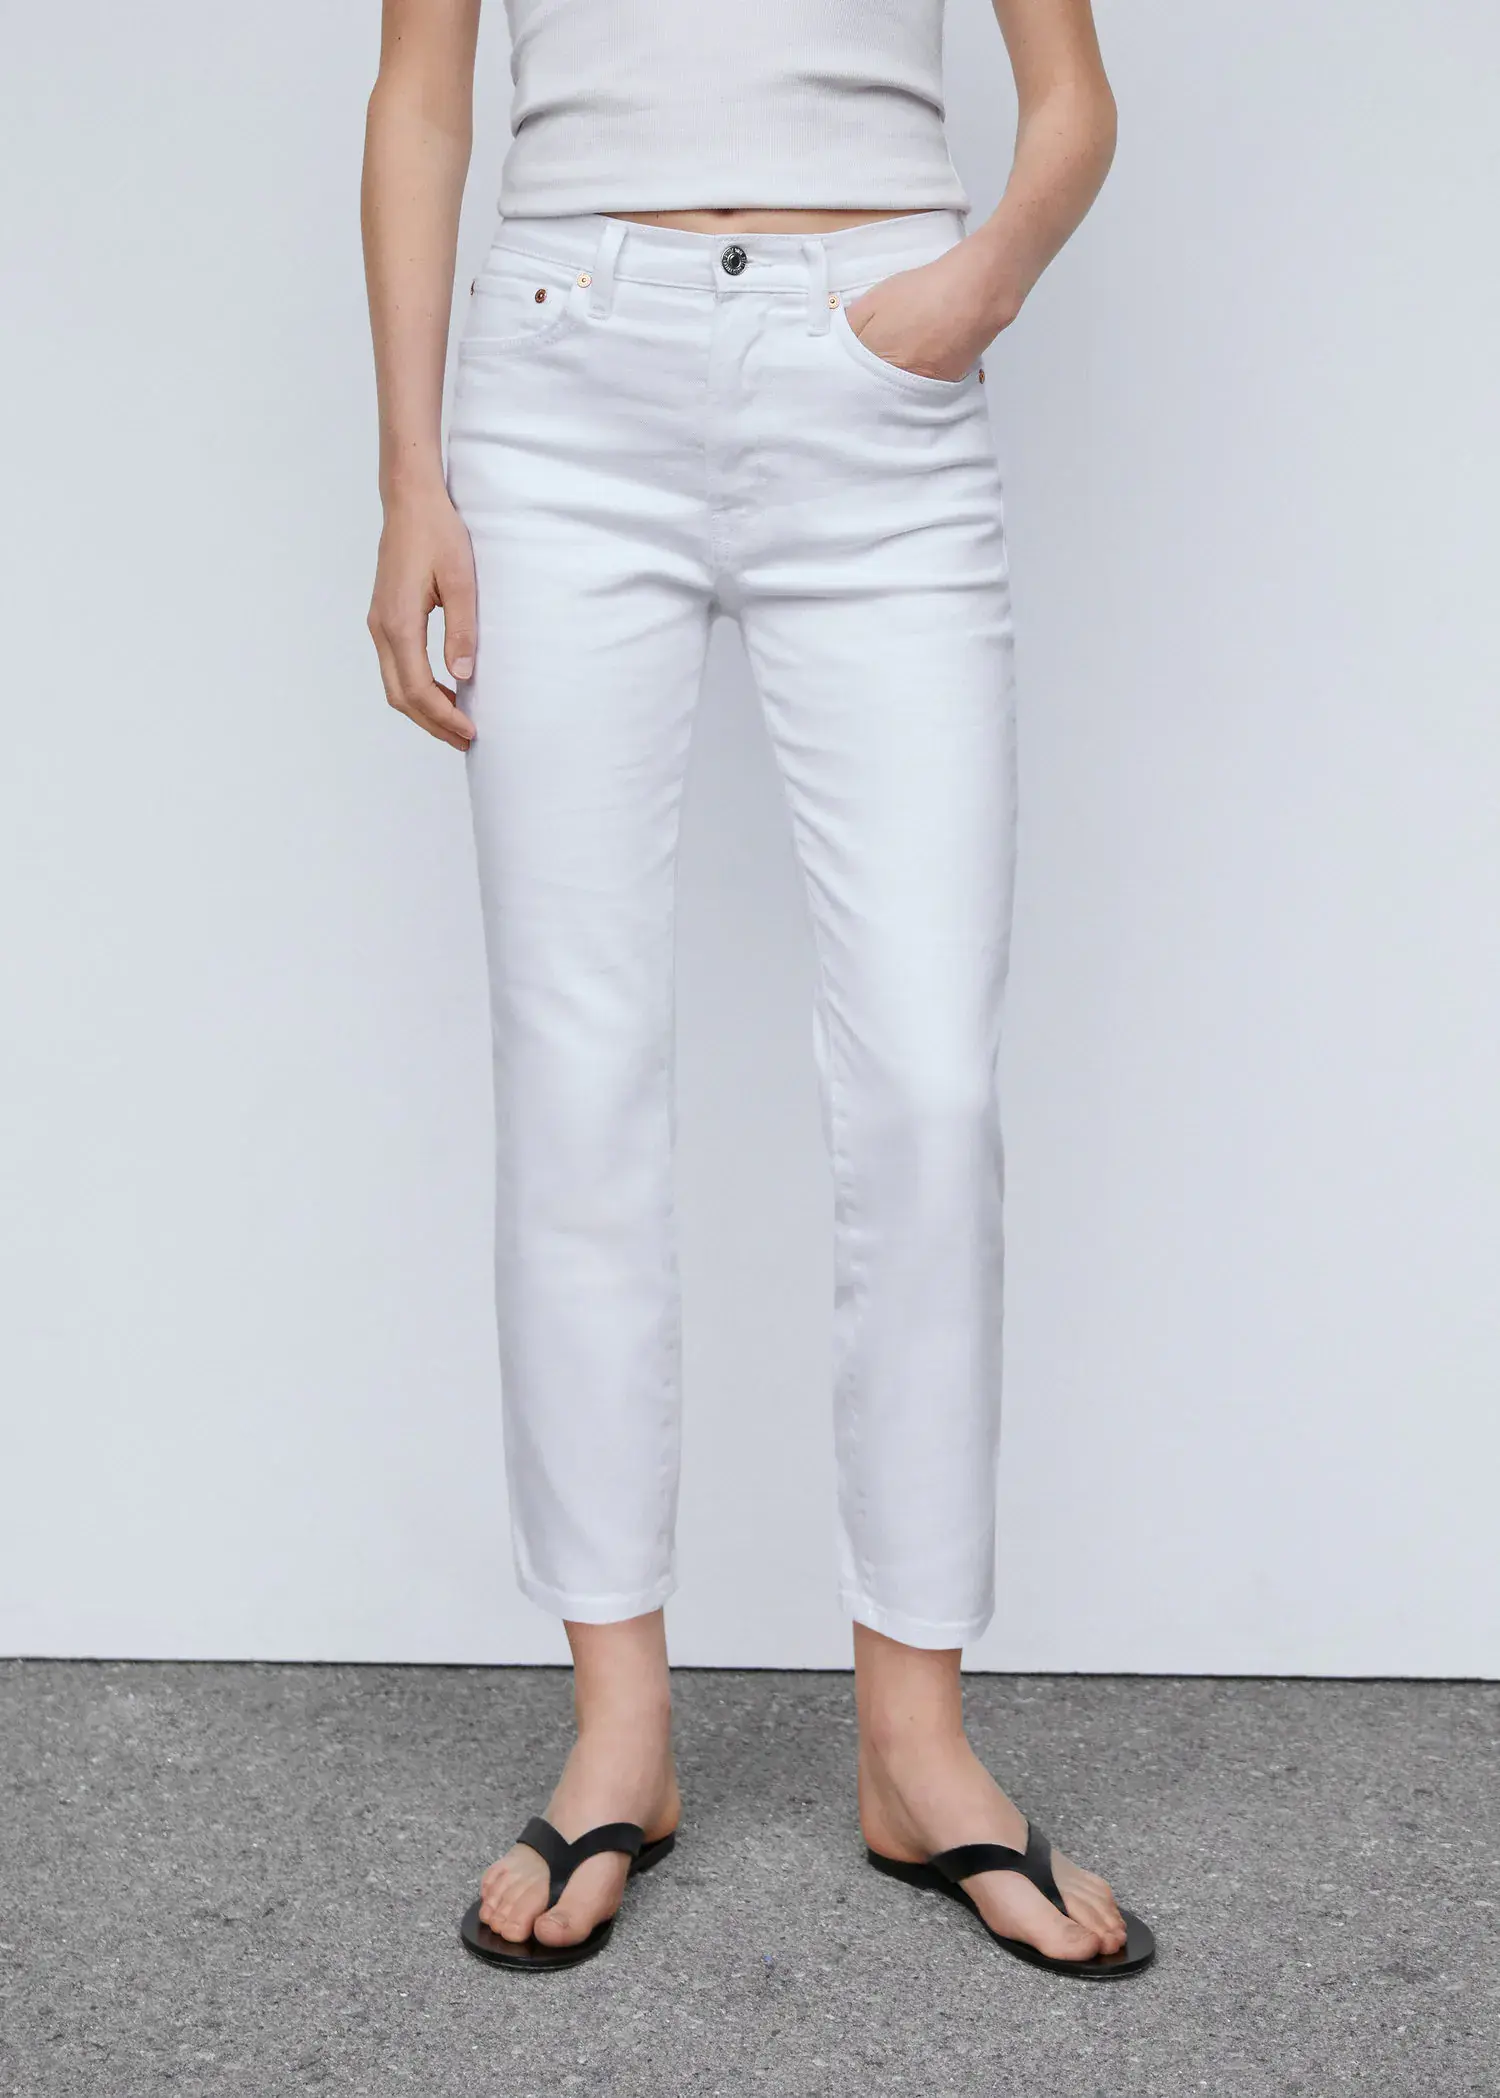 Mango Slim cropped jeans. a person wearing white jeans and a white shirt. 